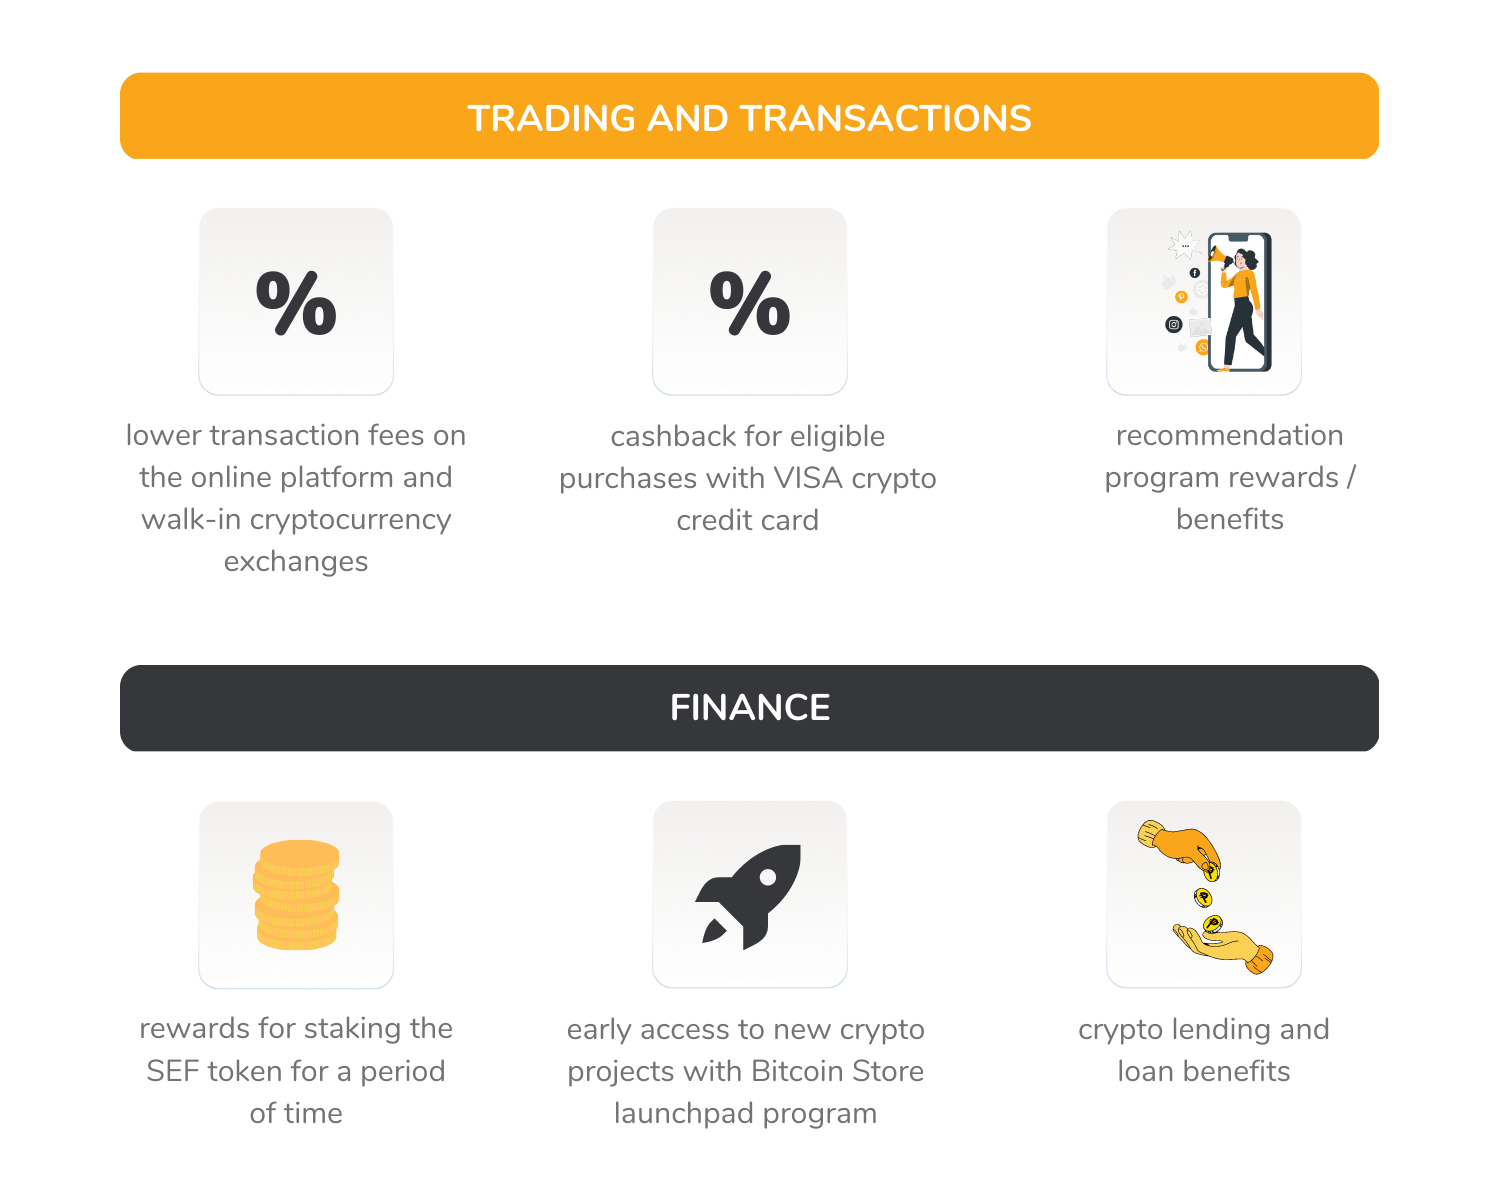 The infographic shows the benefits users can get by using and holding the Store Finance token on the Bitcoin Store platform.